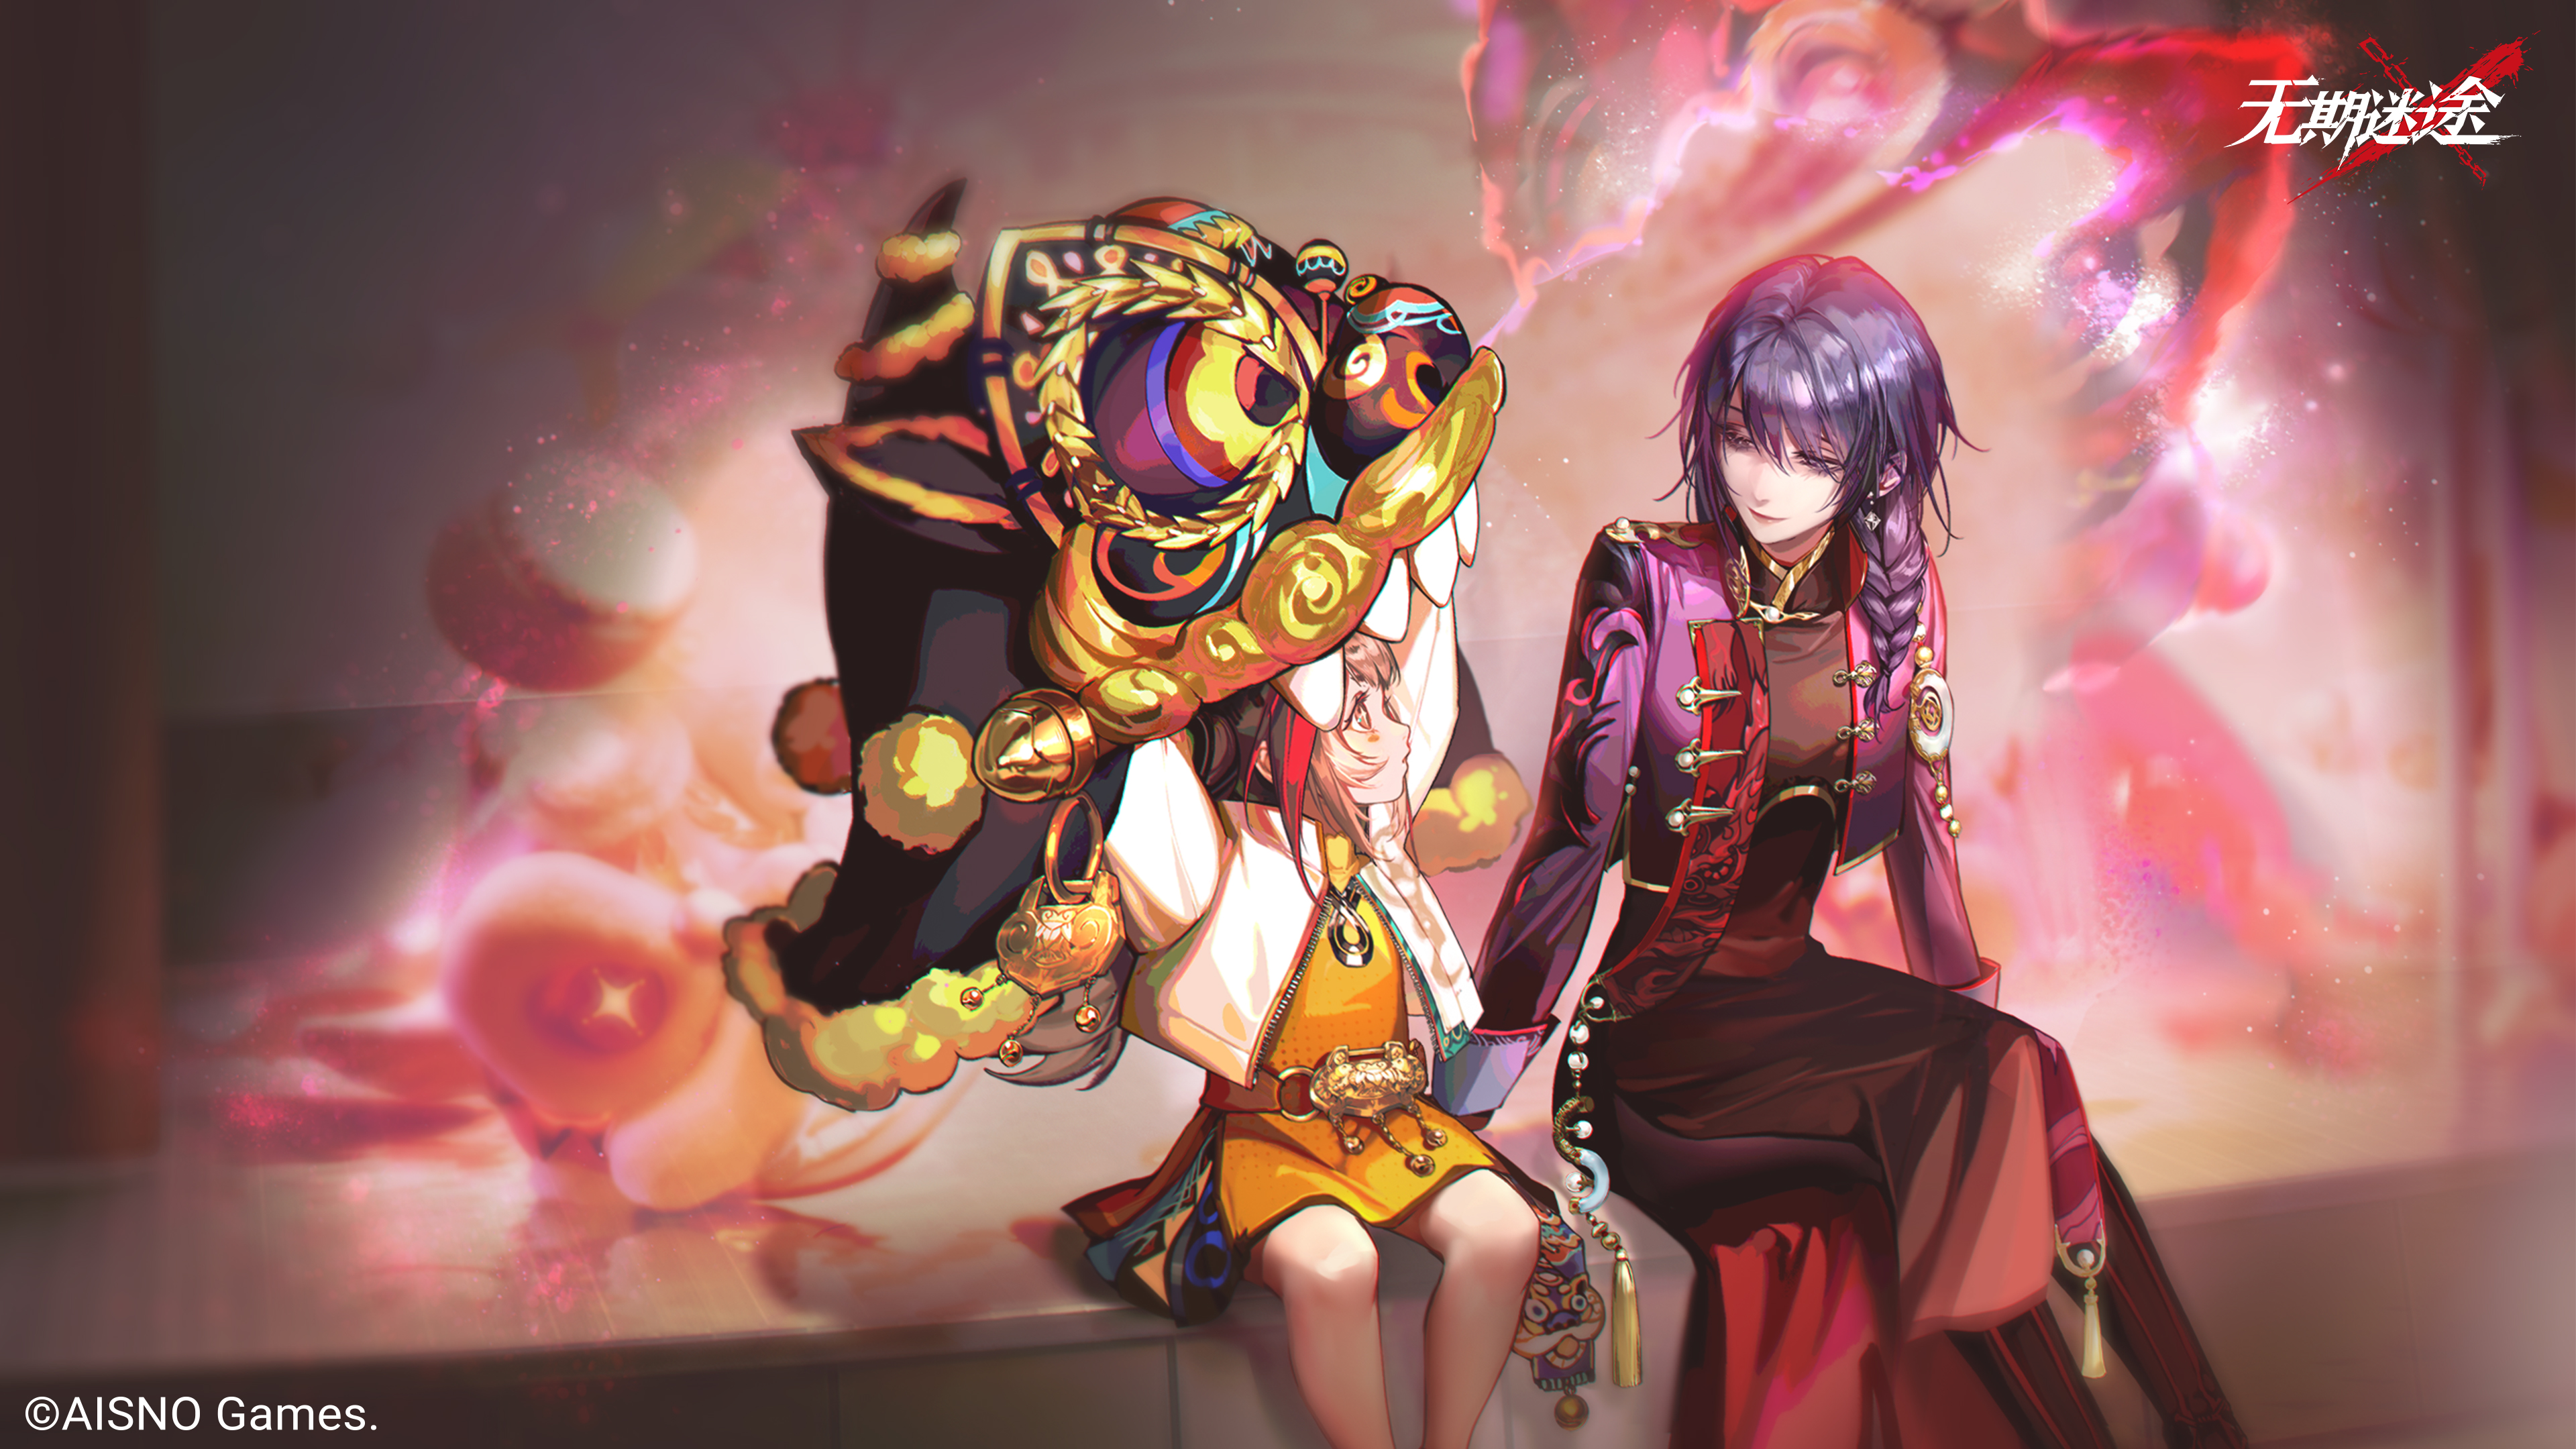 Anime 3840x2160 Path to Nowhere MBCC children purple hair Chinese dragon classy red dress